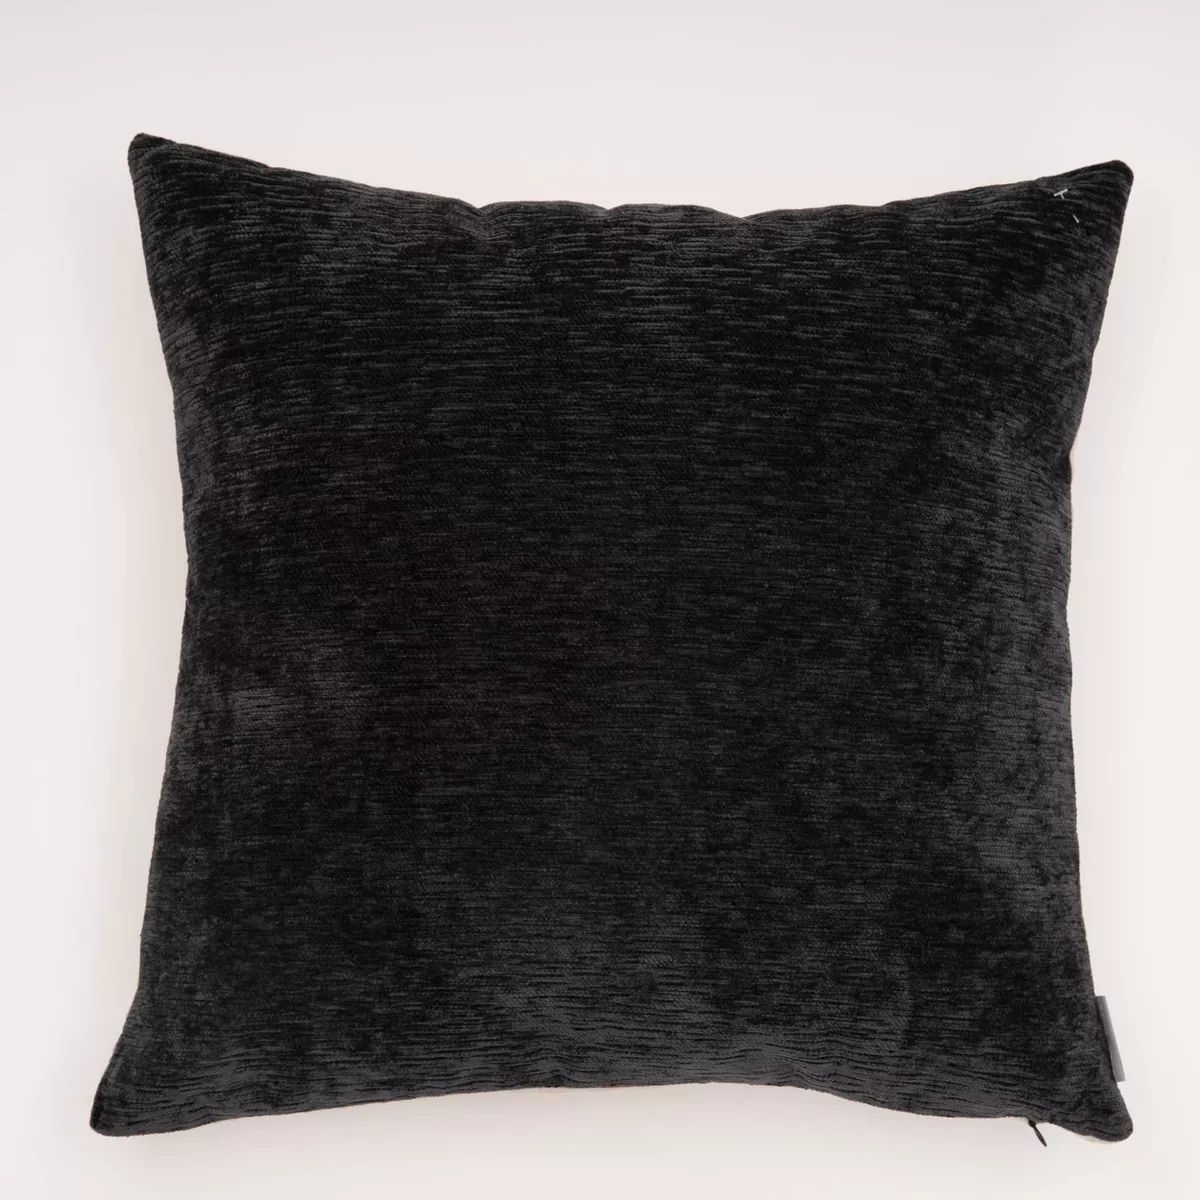 20"x20" Oversize Dainty Chenille to Linen Reverse Square Throw Pillow Black - Evergrace | Target